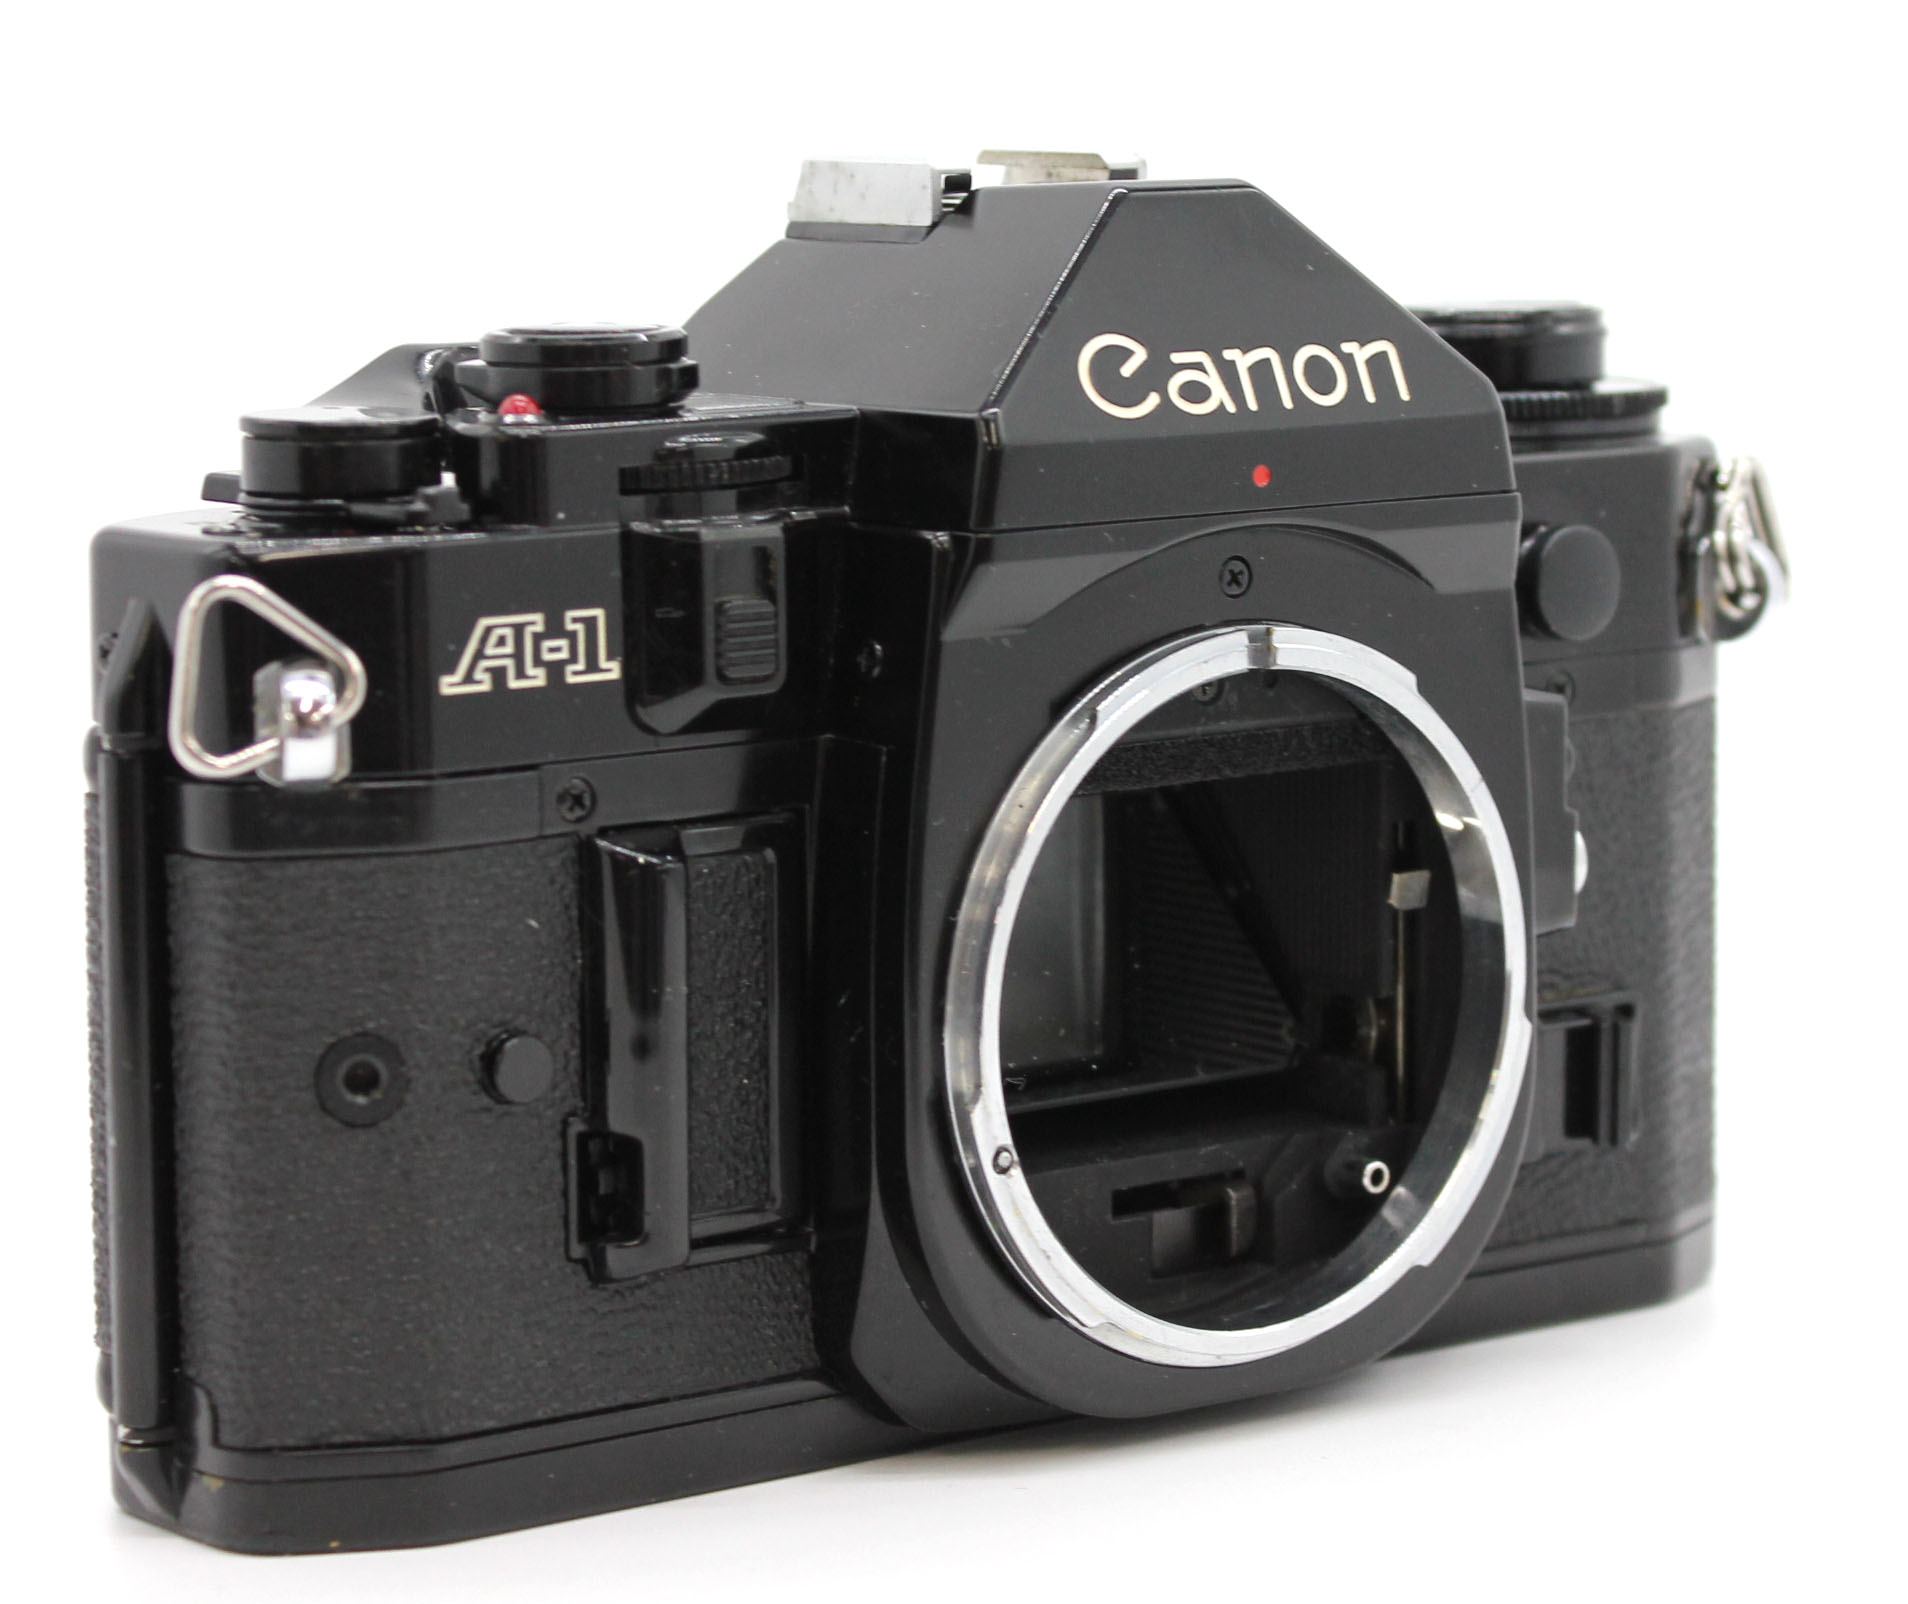  Canon A-1 35mm SLR Film Camera with FD 50mm F/1.4 S.S.C. Lens from Japan Photo 2